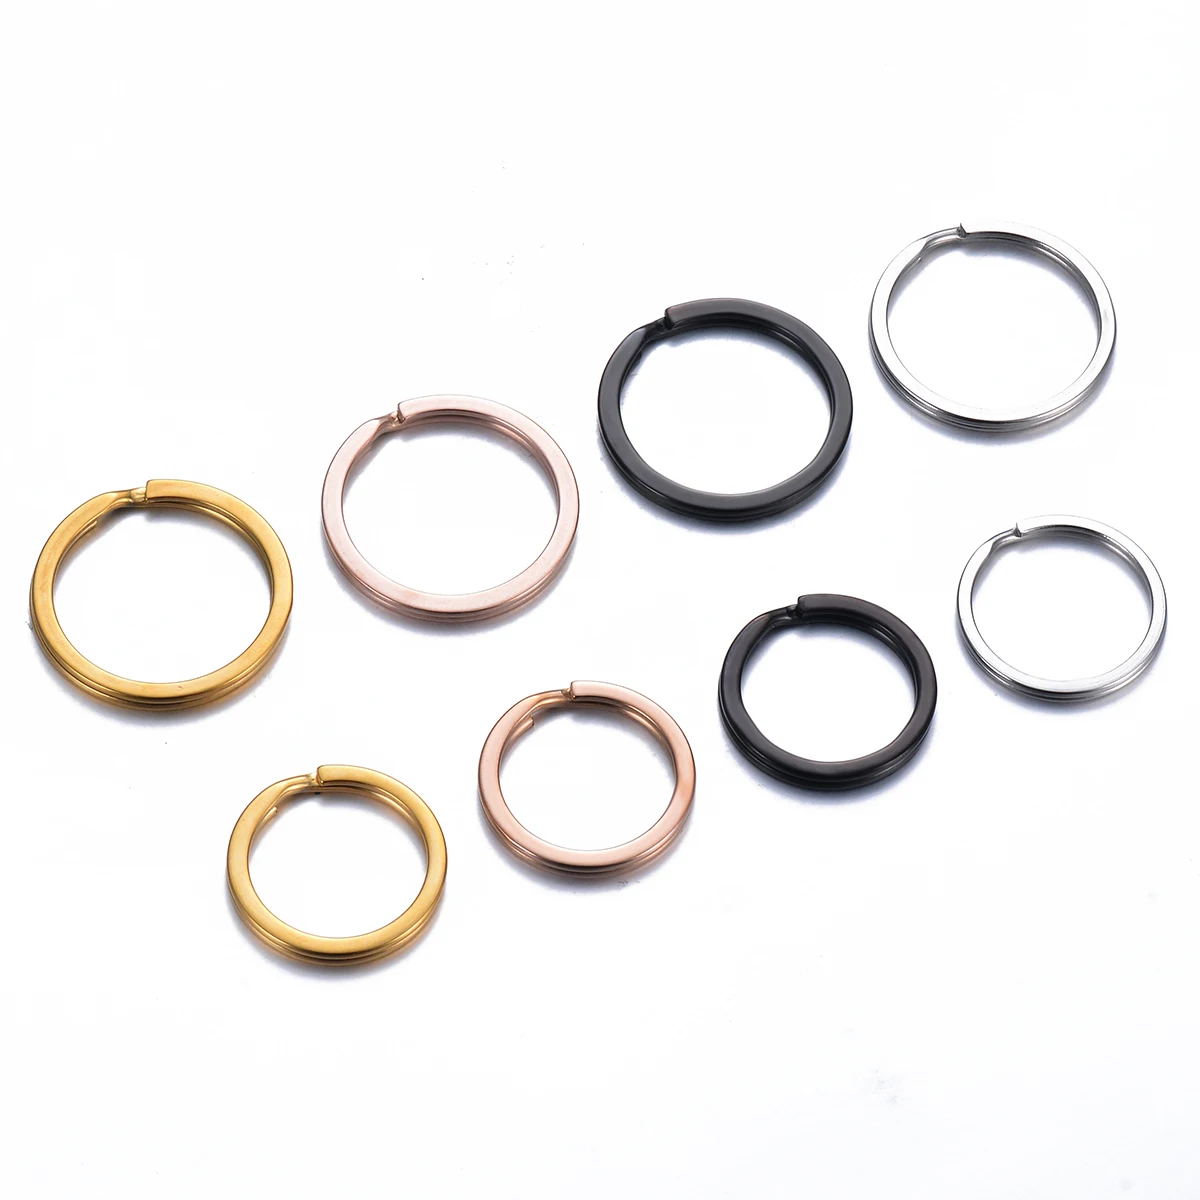 50 Pieces Stainless Steel Key Ring 15 20 25 30 35mm Tarnish Free Round  Keyring Wholesale Flat Split Rings for Key Chain Making - AliExpress